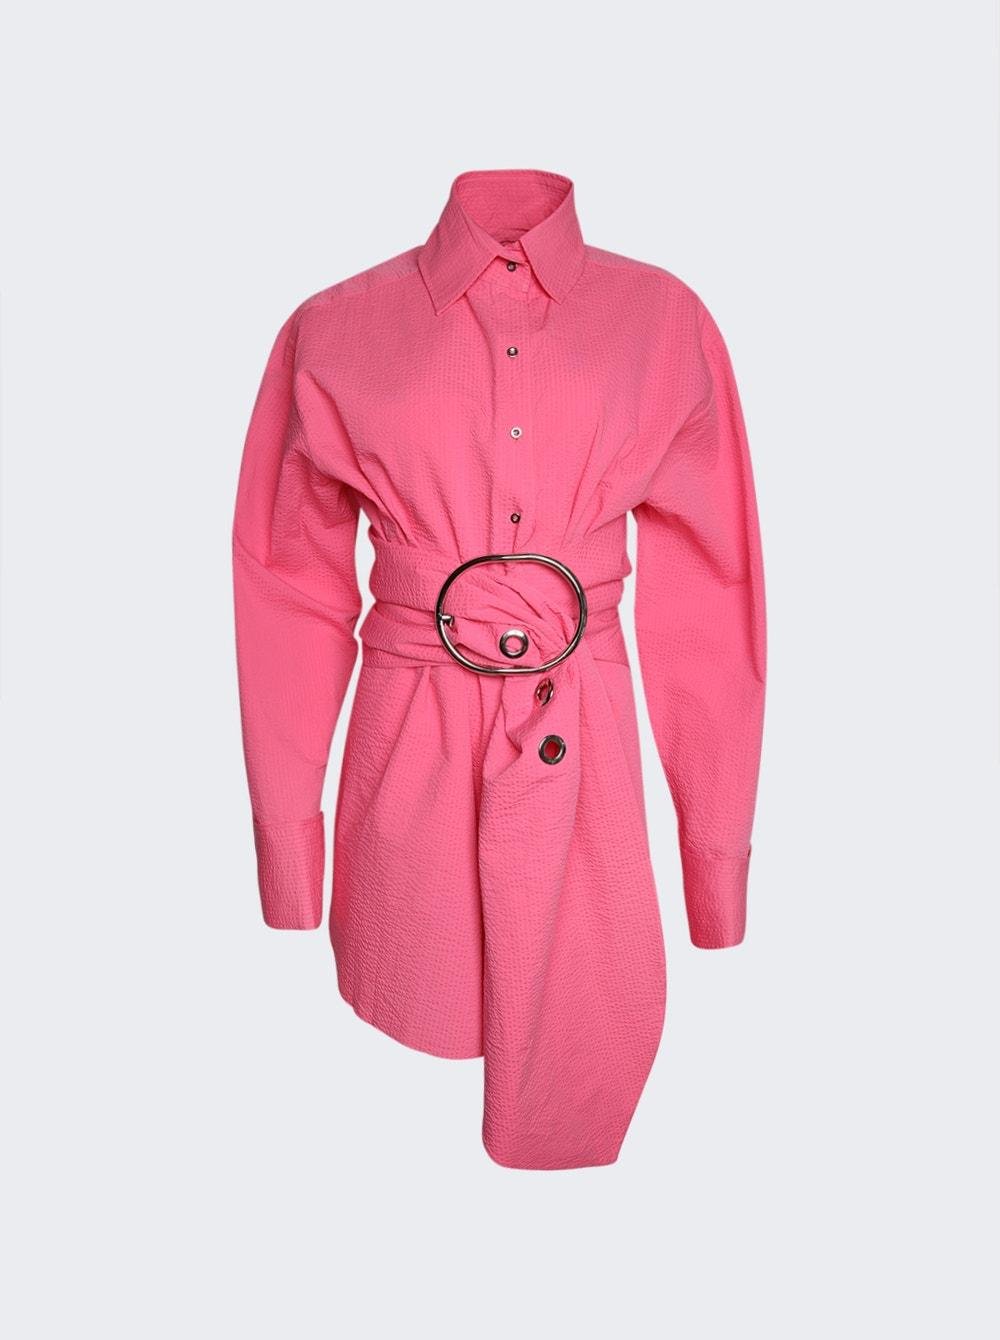 Large Buckle Shirt Pink by MARQUES' ALMEIDA